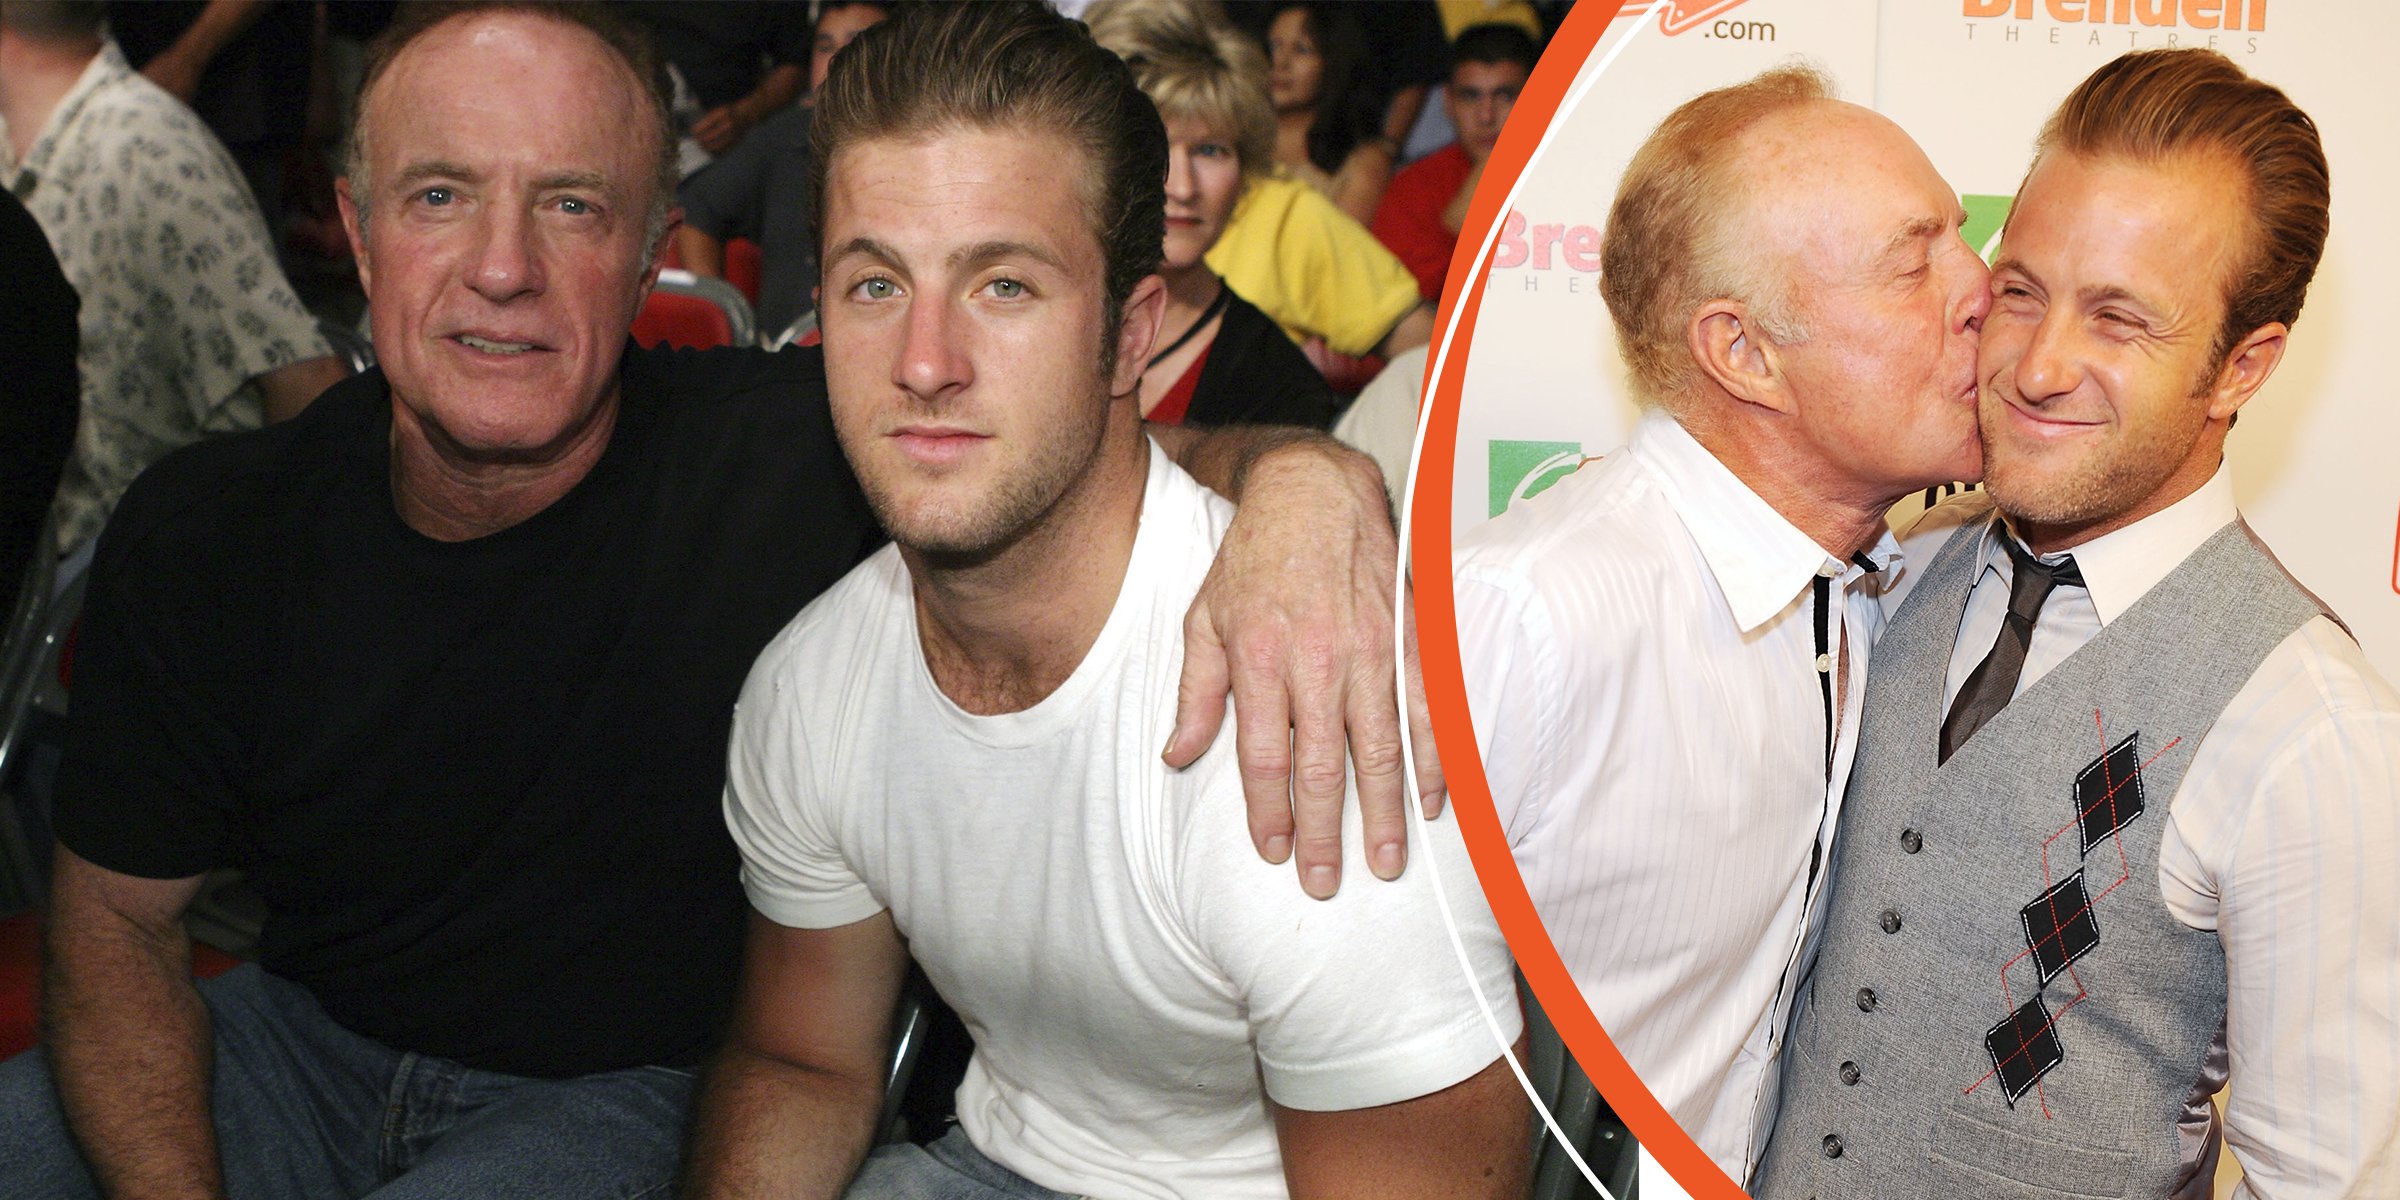 James Caan and his son, Scott Caan | Source: Getty Images